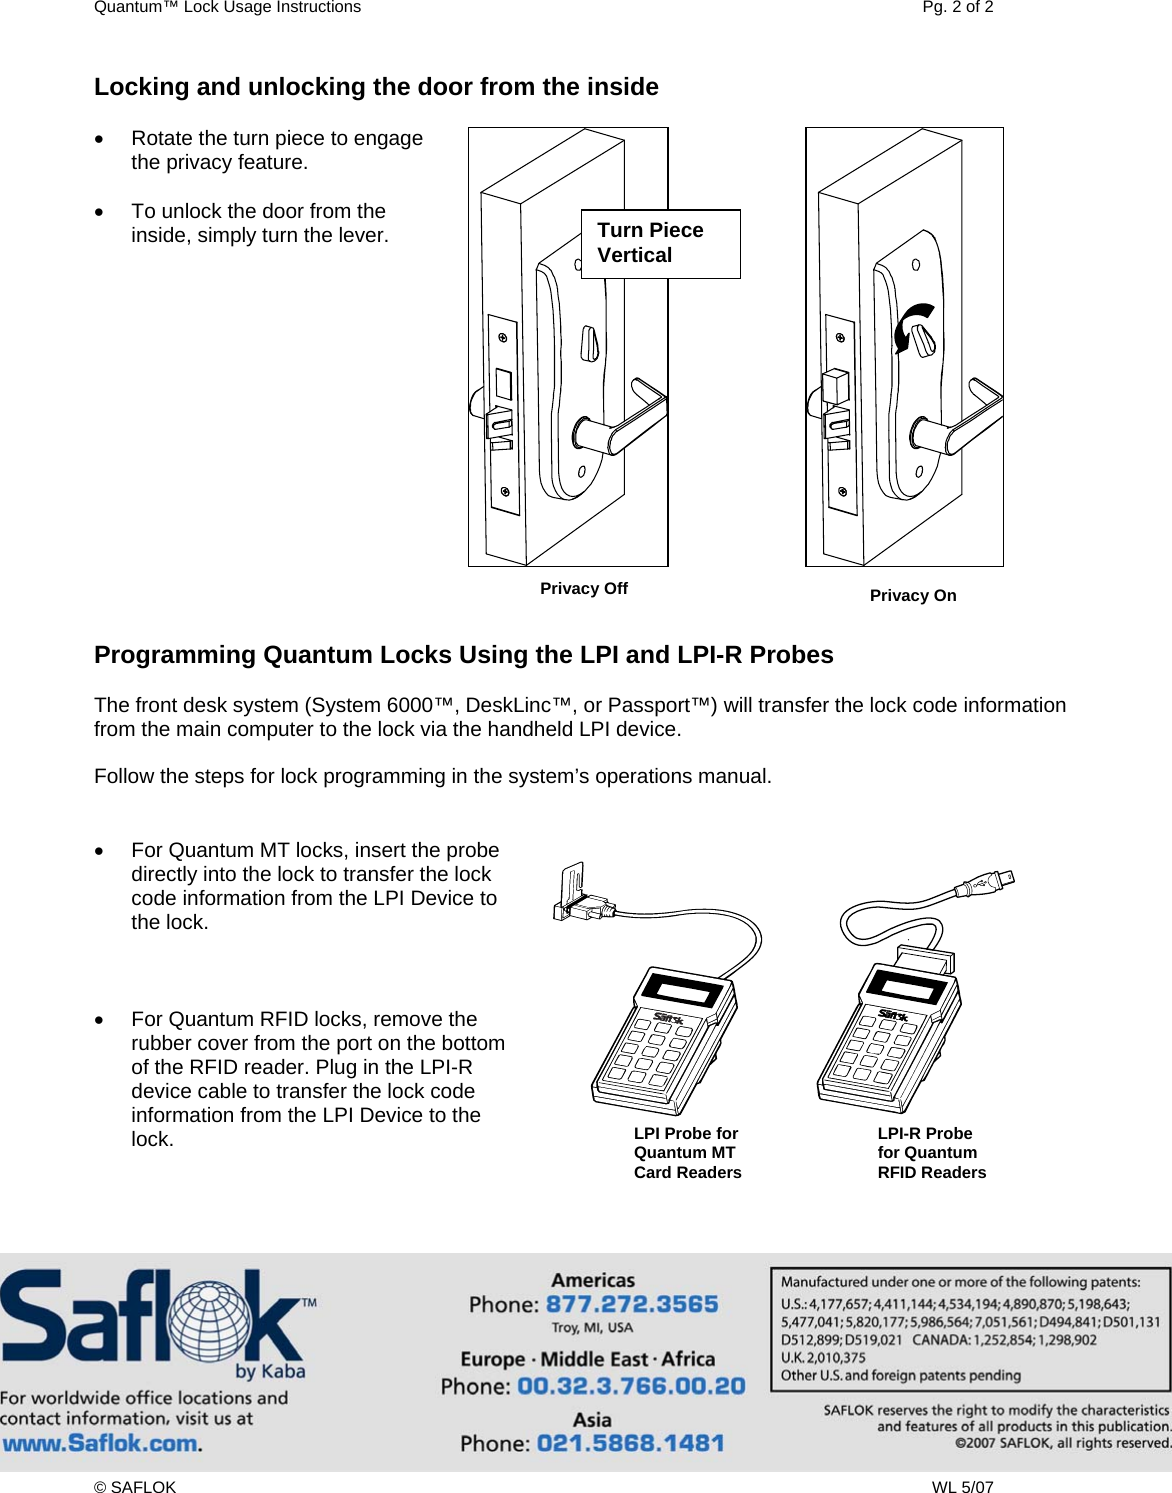 Quantum™ Lock Usage Instructions    Pg. 2 of 2 © SAFLOK    WL 5/07 Locking and unlocking the door from the inside  •  Rotate the turn piece to engage the privacy feature.  •  To unlock the door from the inside, simply turn the lever.                Programming Quantum Locks Using the LPI and LPI-R Probes  The front desk system (System 6000™, DeskLinc™, or Passport™) will transfer the lock code information from the main computer to the lock via the handheld LPI device.   Follow the steps for lock programming in the system’s operations manual.   •  For Quantum MT locks, insert the probe directly into the lock to transfer the lock code information from the LPI Device to the lock.    •  For Quantum RFID locks, remove the rubber cover from the port on the bottom of the RFID reader. Plug in the LPI-R device cable to transfer the lock code information from the LPI Device to the lock.    LPI-R Probe for Quantum RFID Readers Turn Piece Vertical Privacy On Privacy OffLPI Probe for Quantum MT  Card Readers 